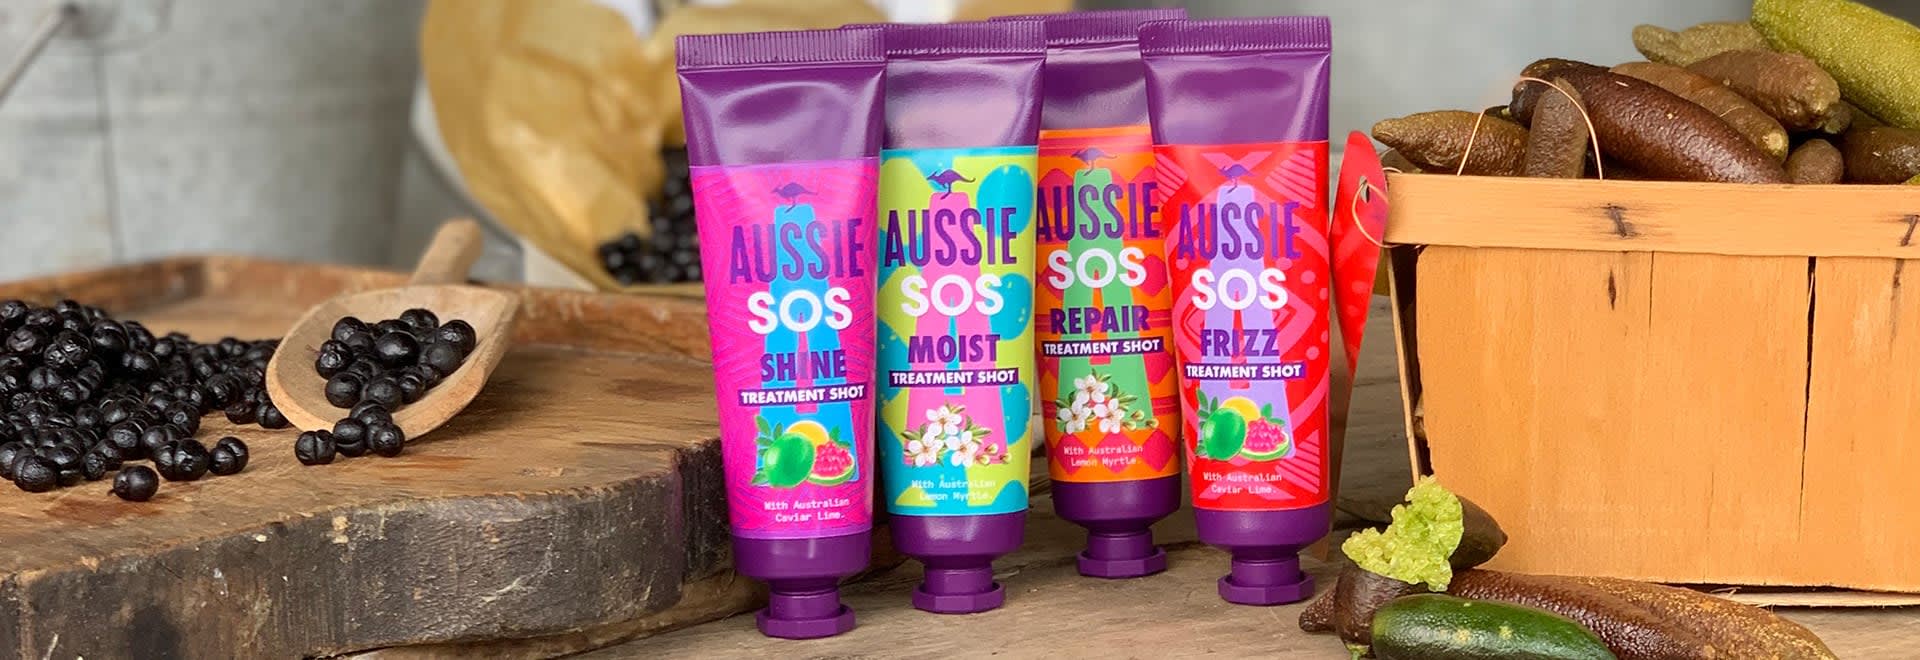 A photo of Aussie products standing one next to each other on a table next to pepperberries in a basket